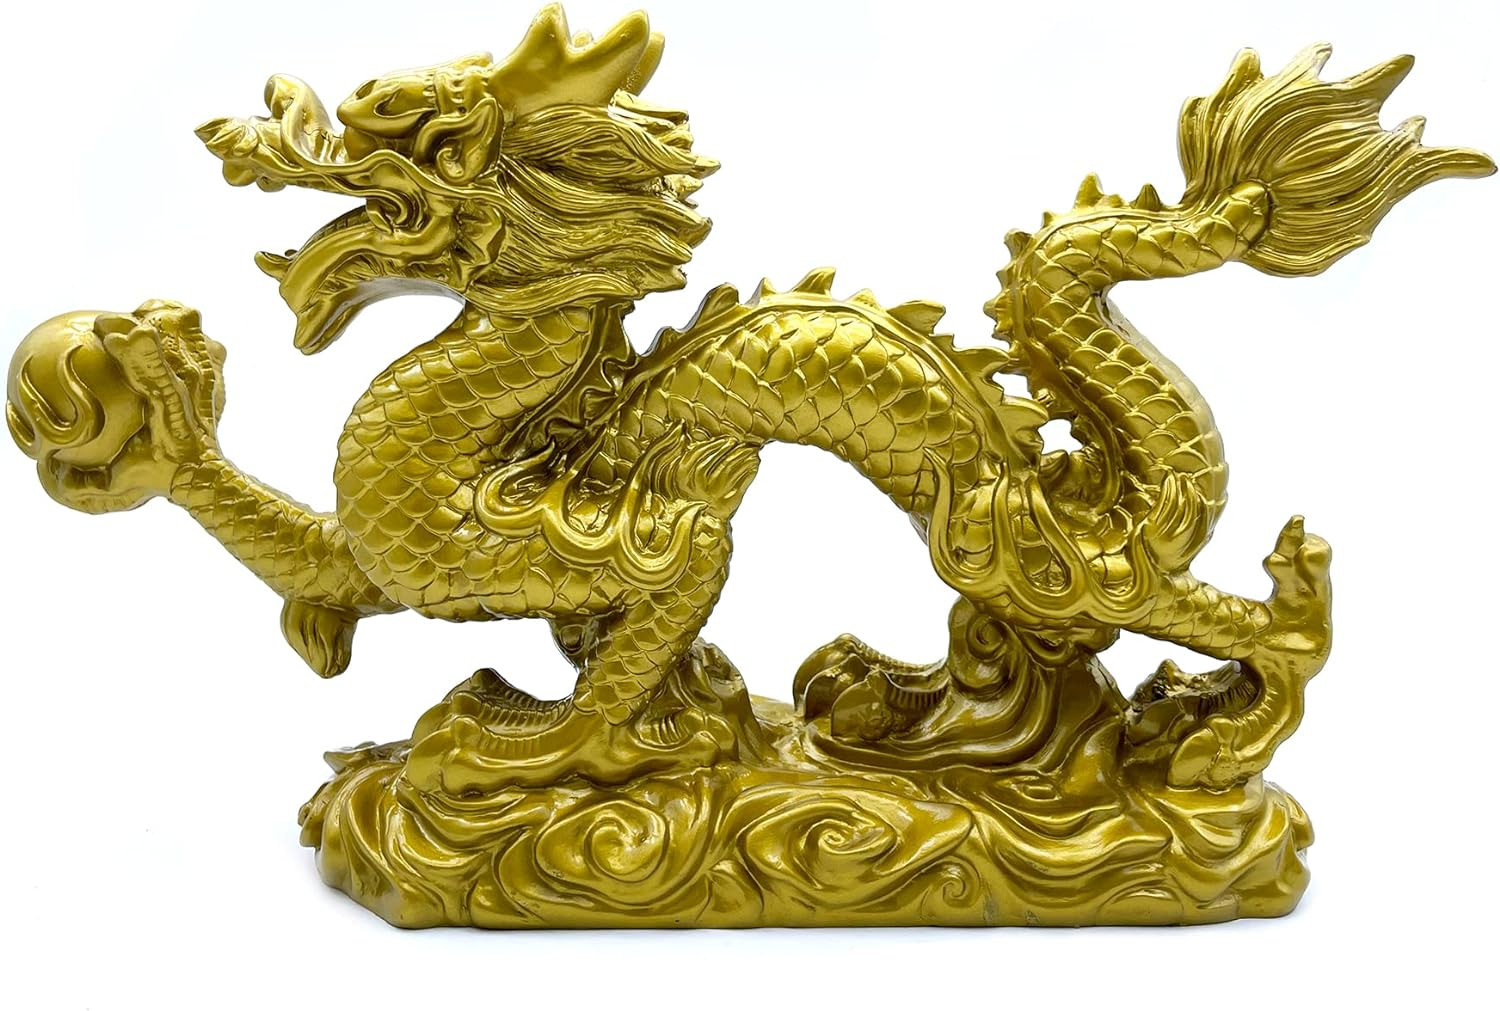 Large 13 Inch Chinese Gold Dragon Statue Feng Shui Decor Figurines Sculpture Col